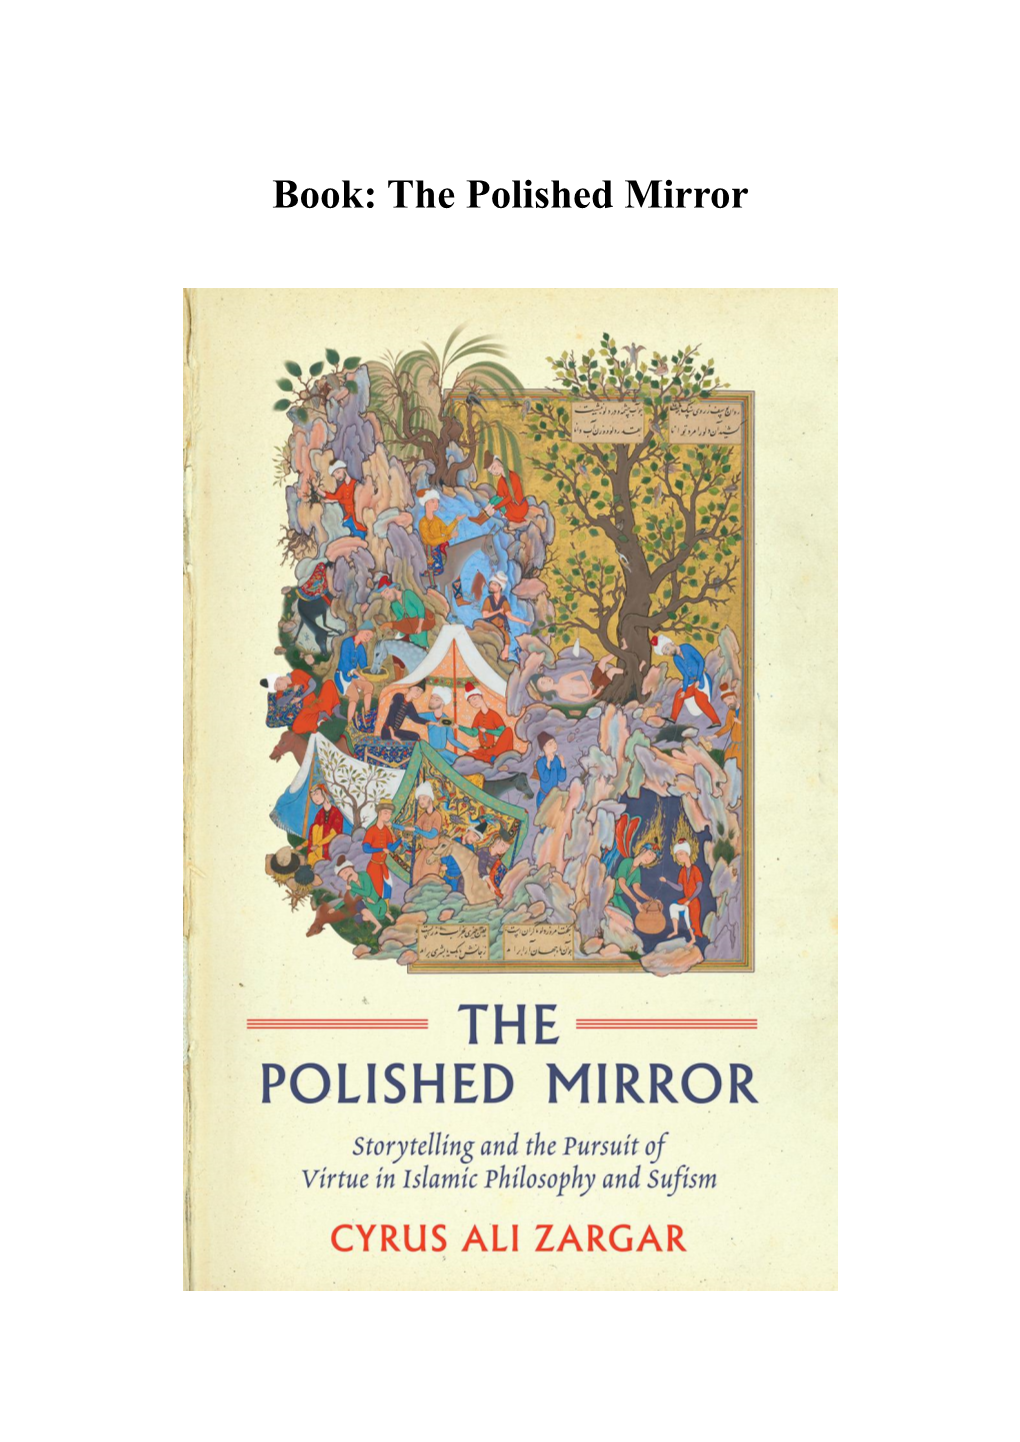 The Polished Mirror